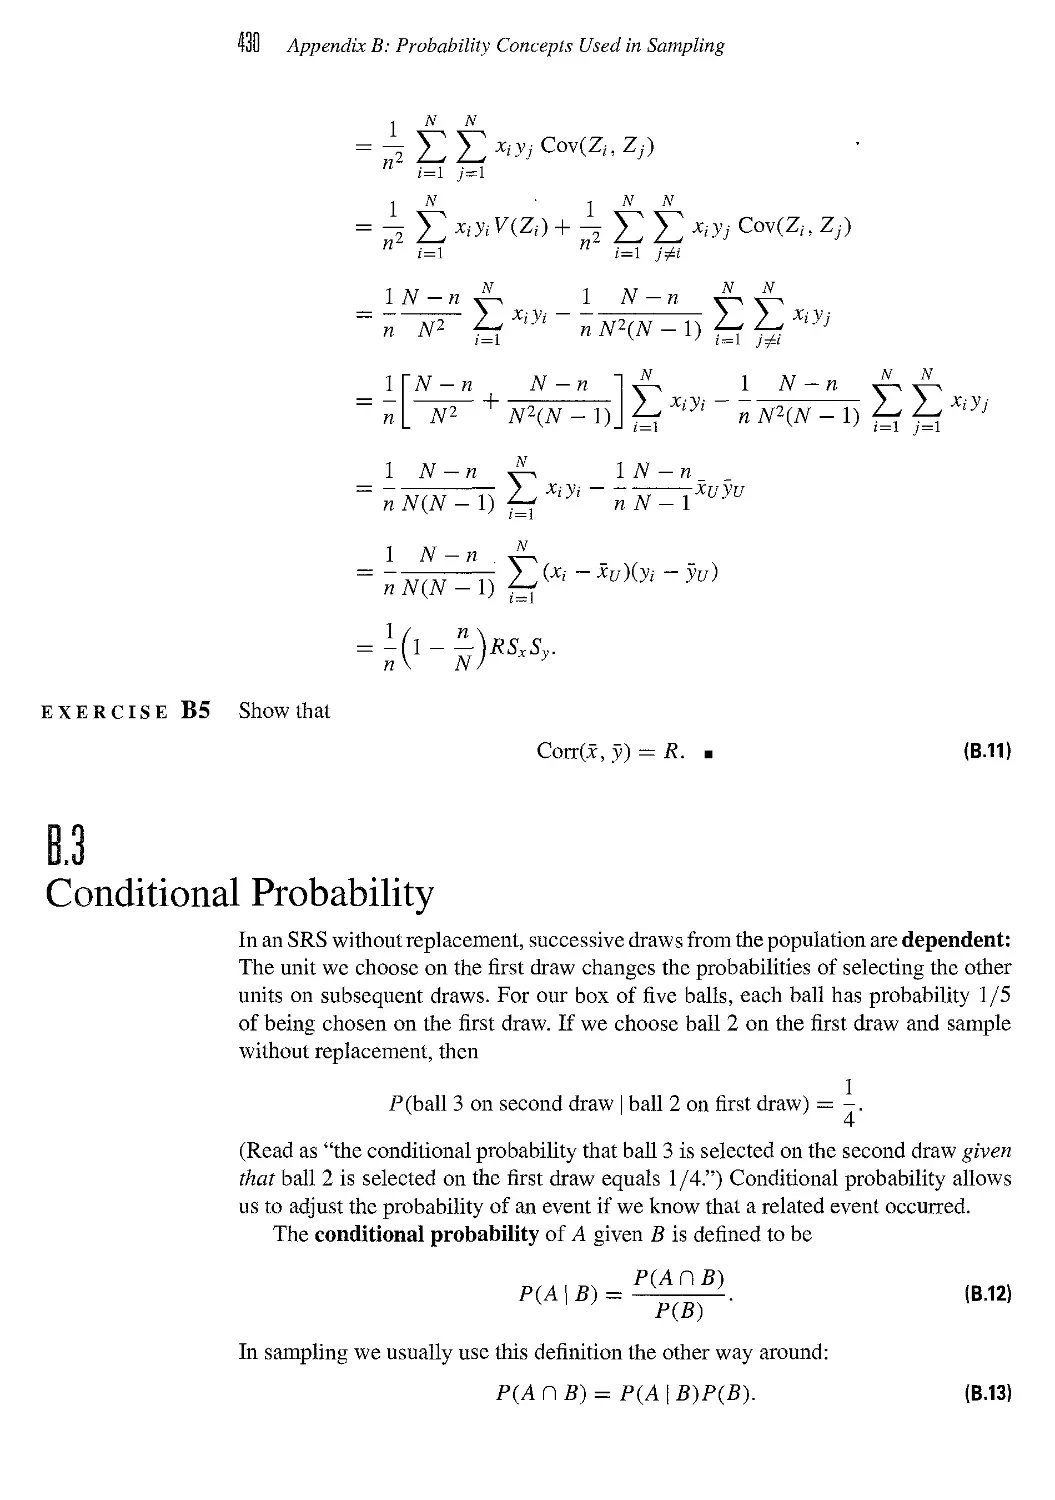 B.3 Conditional Probability